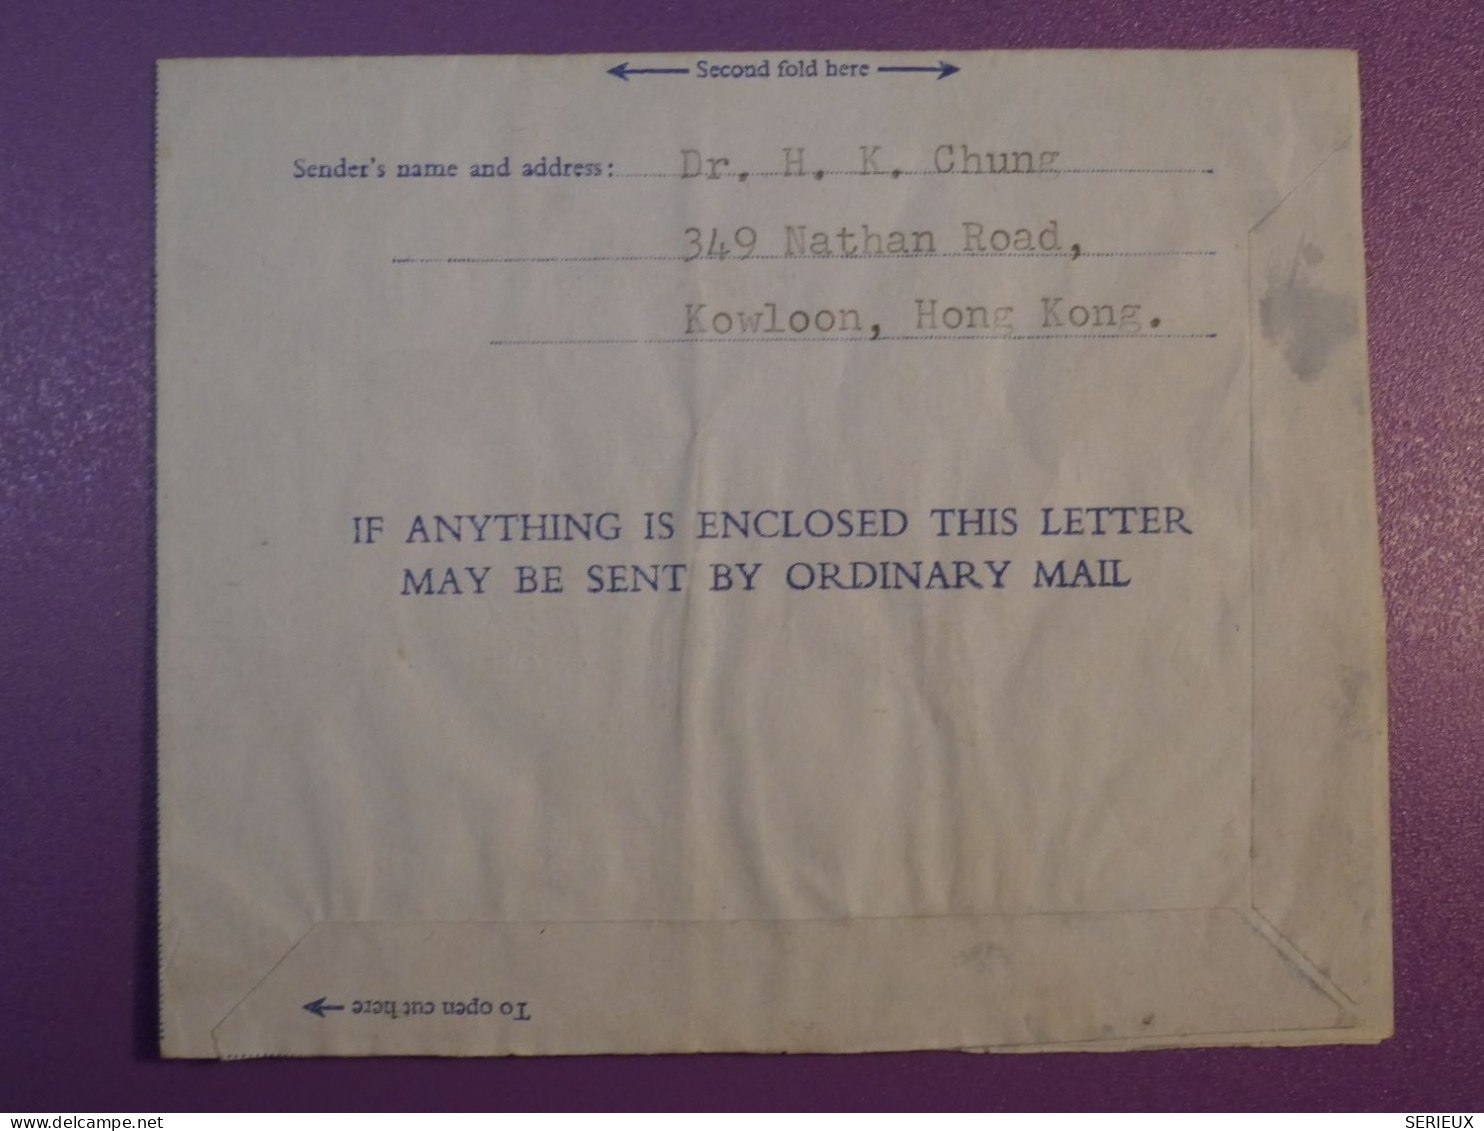 DG6 HONG KONG    BELLE LETTRE AEROGRAMME .AIR LETTER  1954 Kowloon A SOMERVILLE   USA +  AFF. INTERESSANT+ + - Covers & Documents